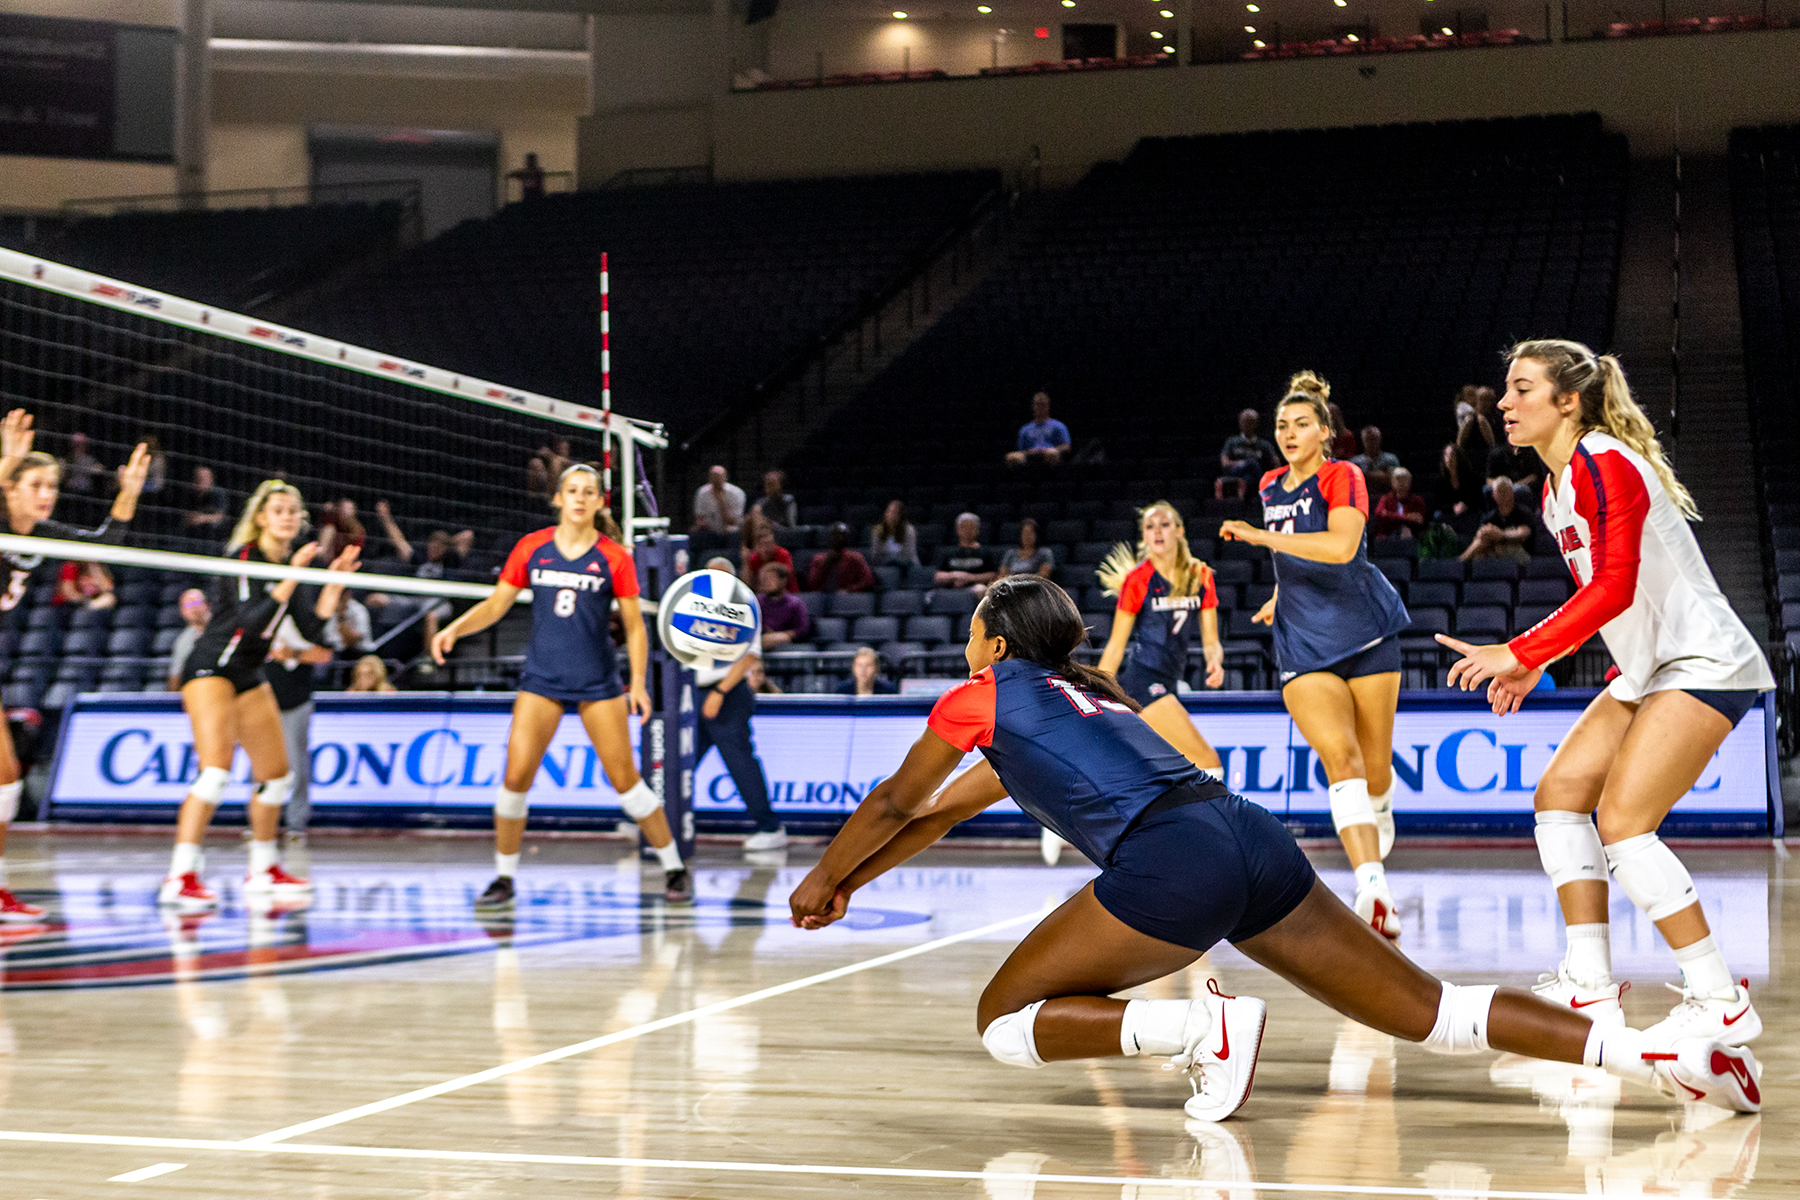 Lady Flames volleyball sets sights on ASUN championship tournament